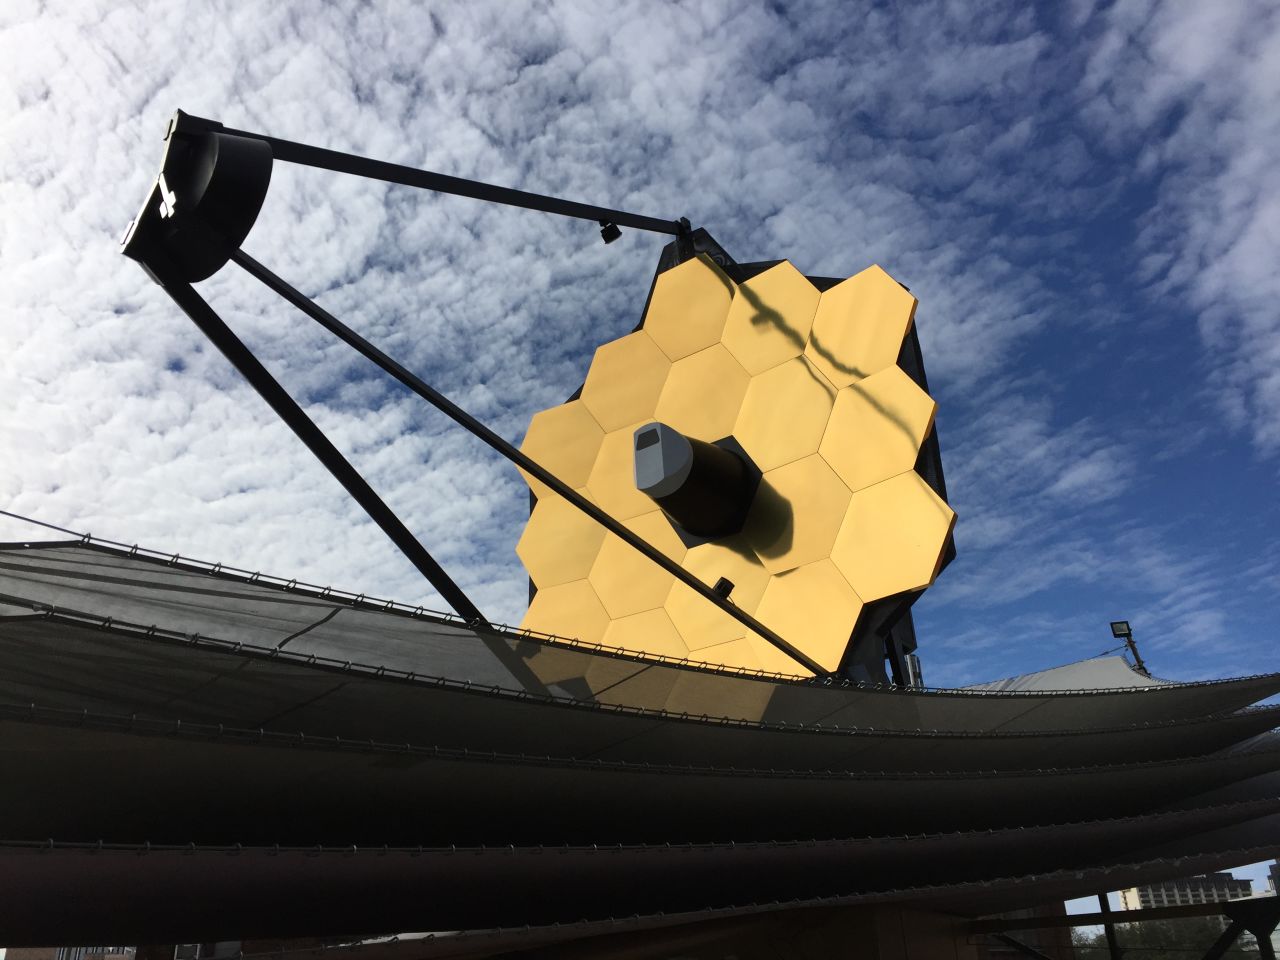 A full size replica of the James Webb Space Telescope shown at the 2017 Super Bowl.